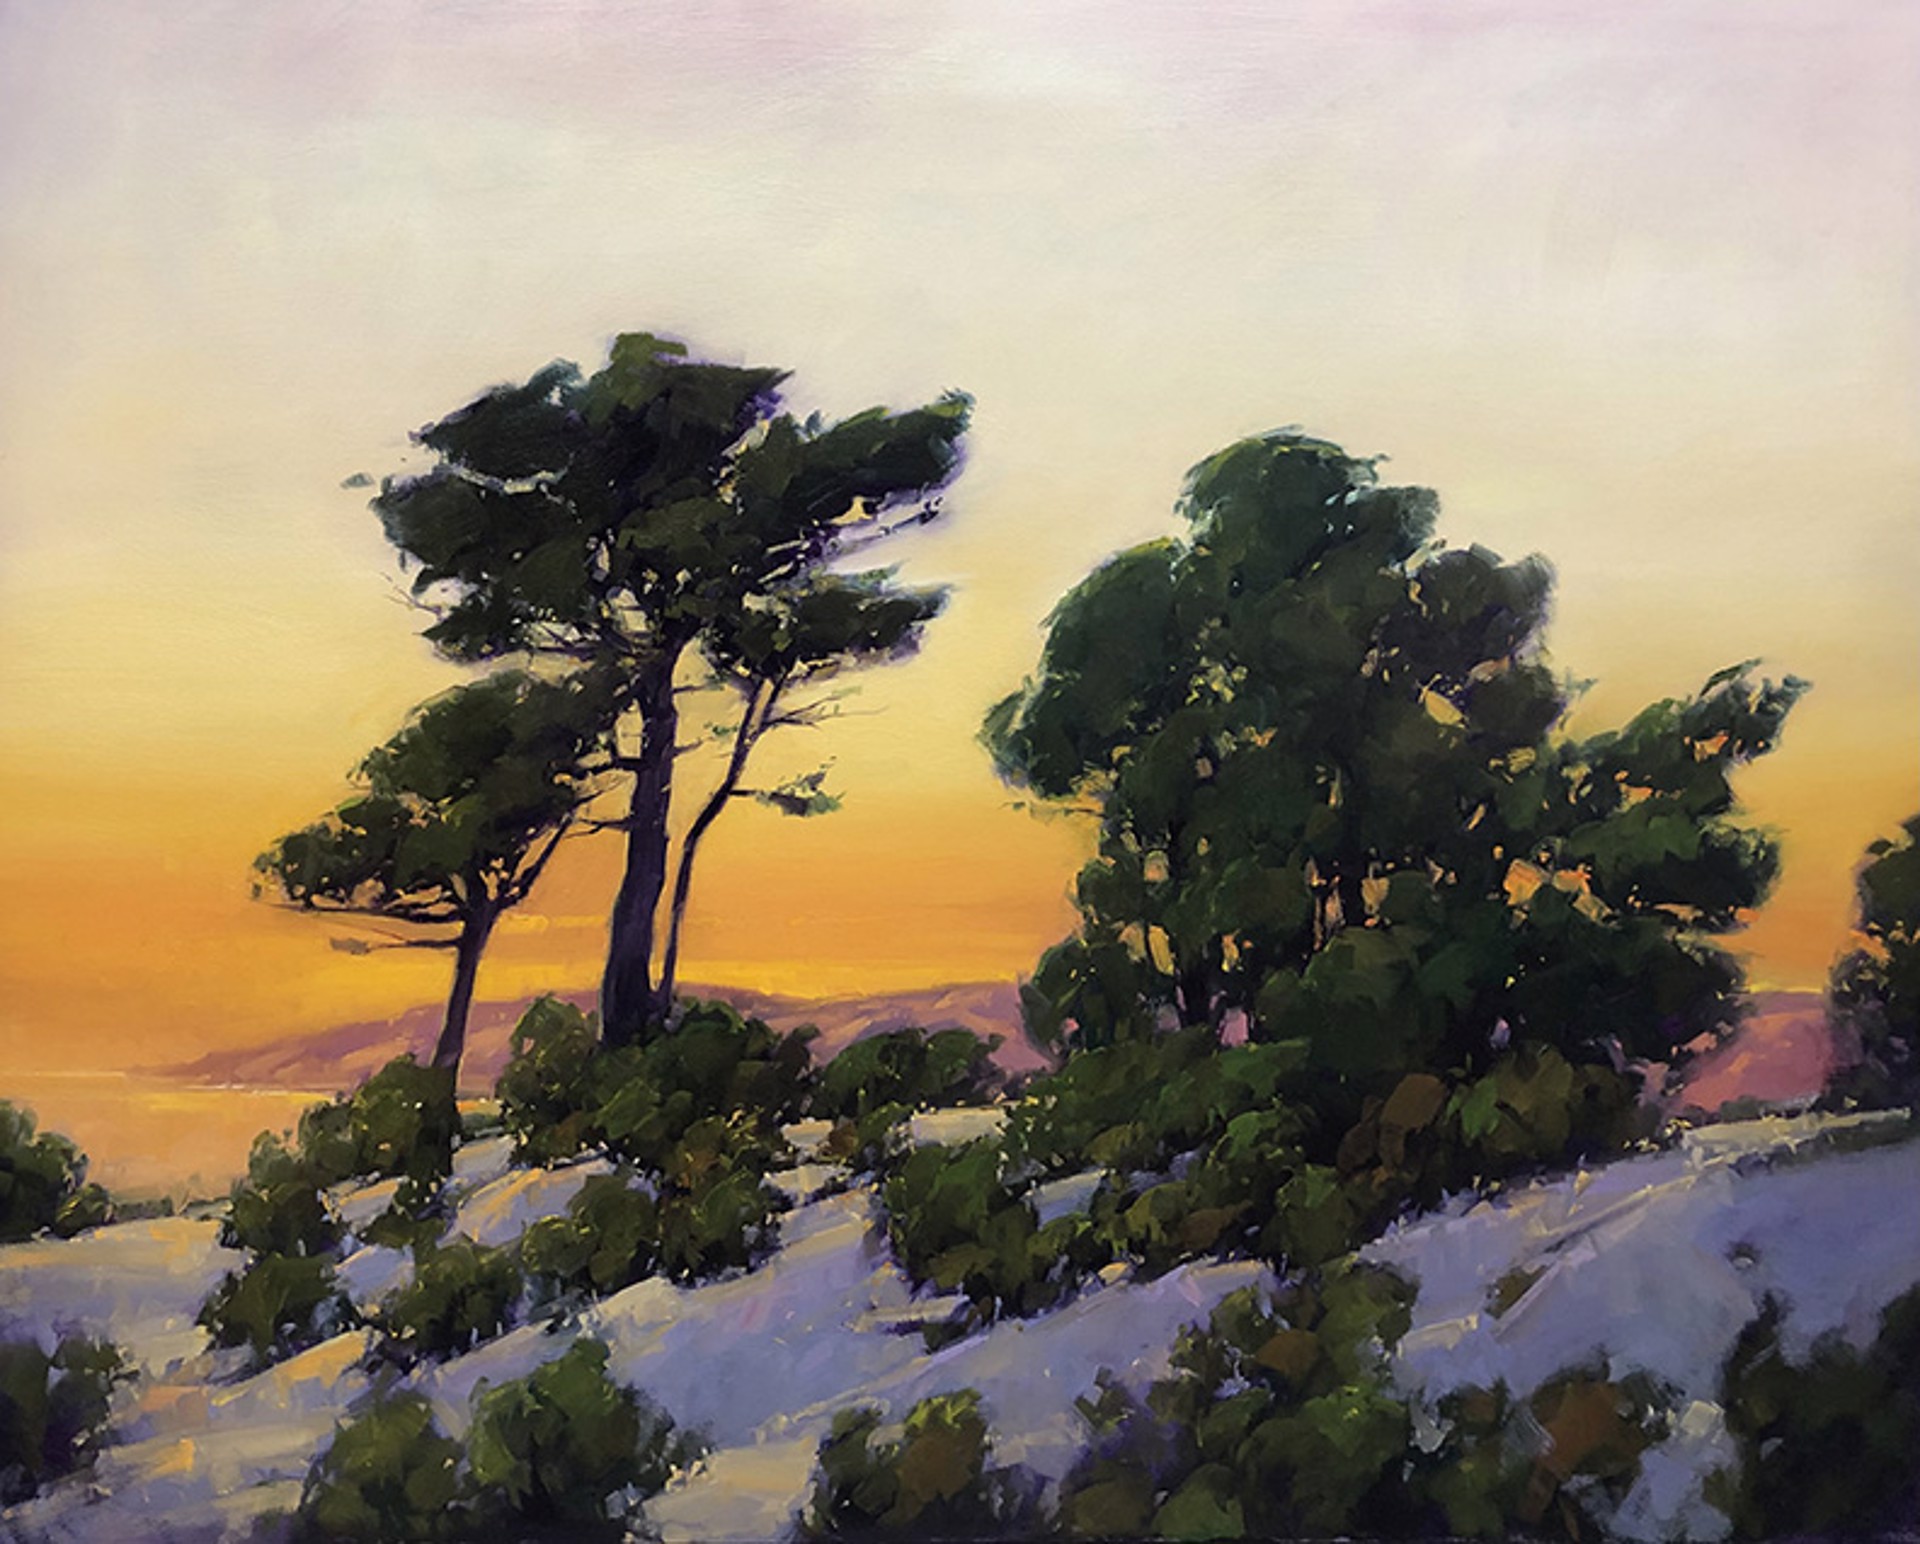 Dusk on the Dunes by Gregory Stocks